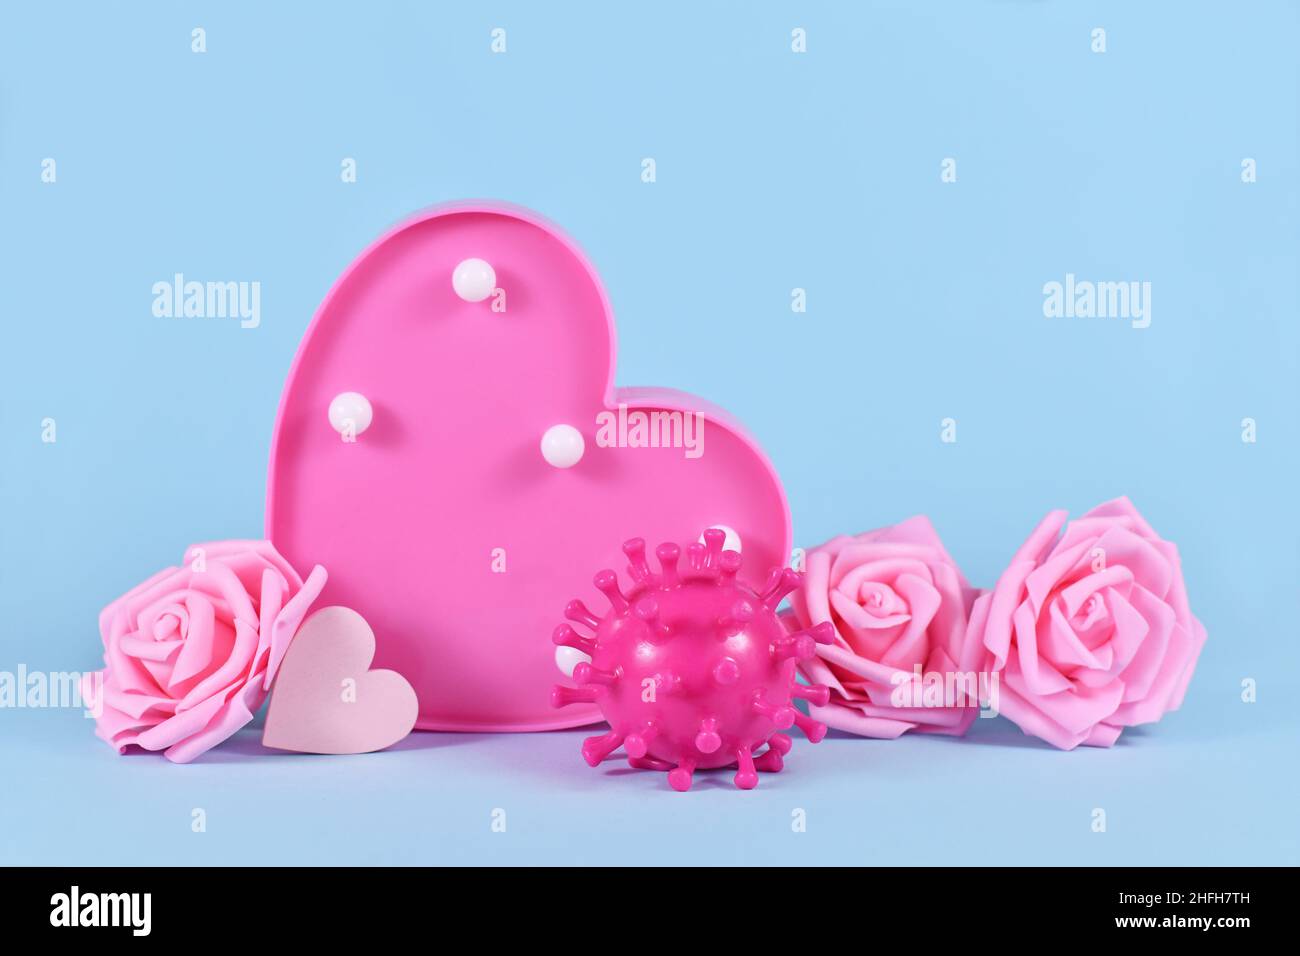 Valentine's day during Corona pandemic concept with virus model, roses and hearts on blue background with copy space Stock Photo